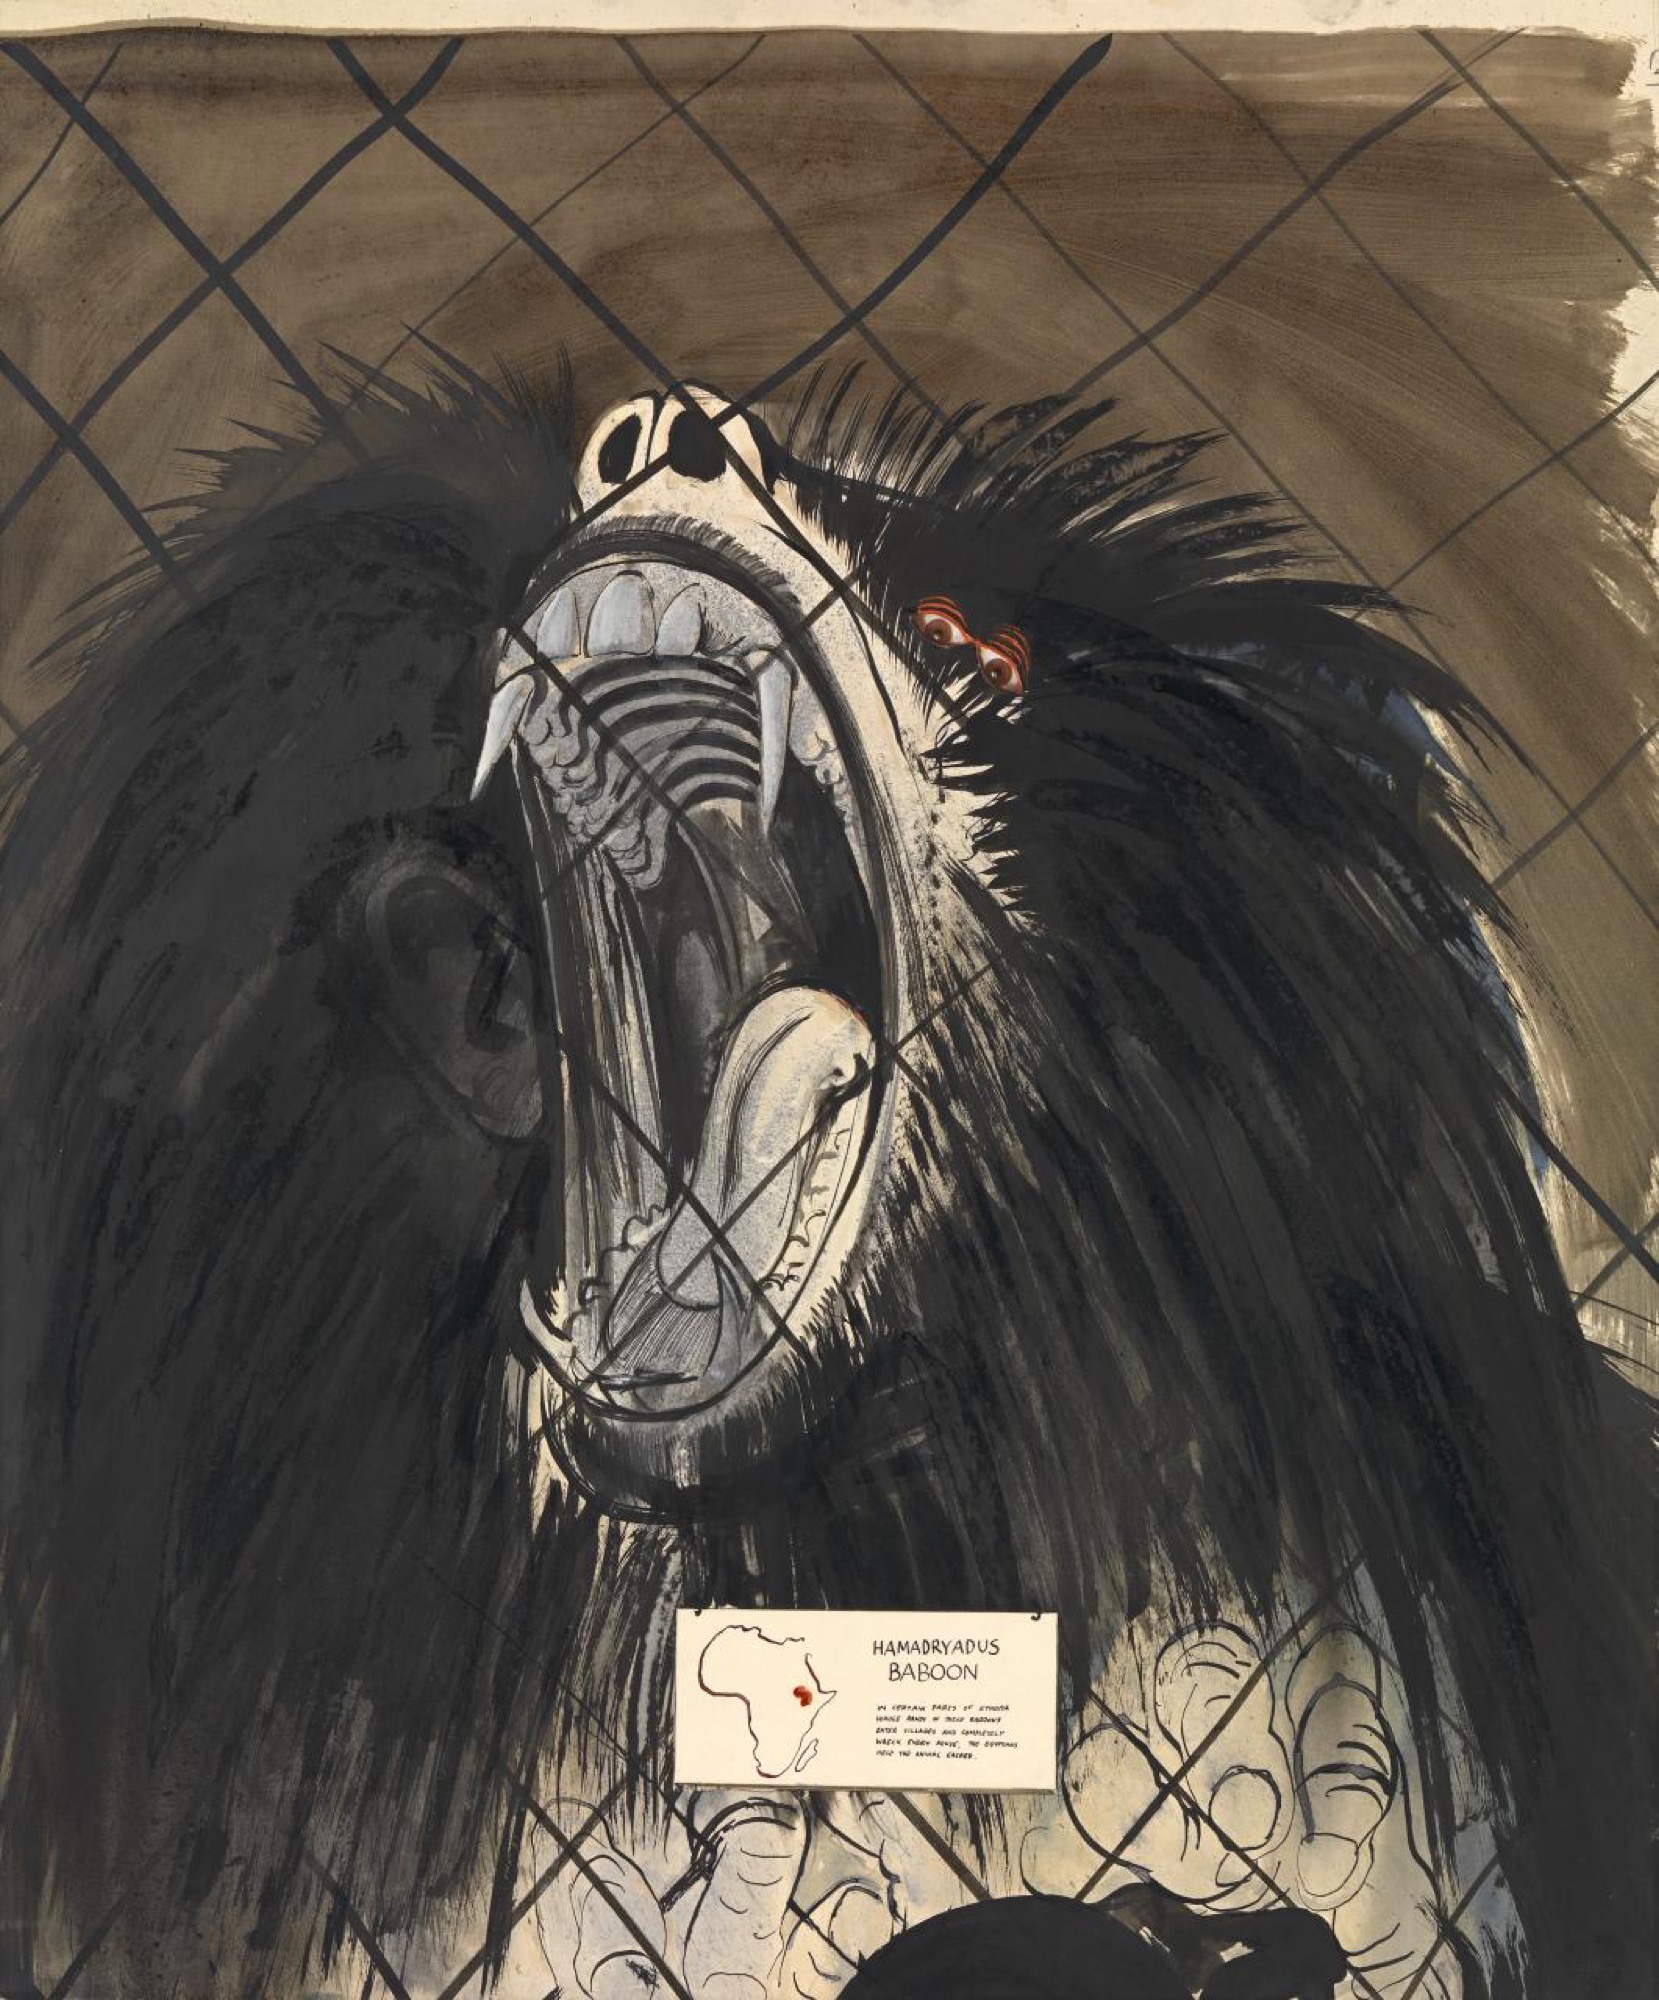 Brett WHITELEY, <em>Sacred baboon</em>, 1975, brush and ink, wood stain, watercolour, gouache and cut printed colour illustration on cardboard, 81.6 x 67.6 cm (image and sheet). National Gallery of Victoria, Melbourne, © Wendy Whiteley.